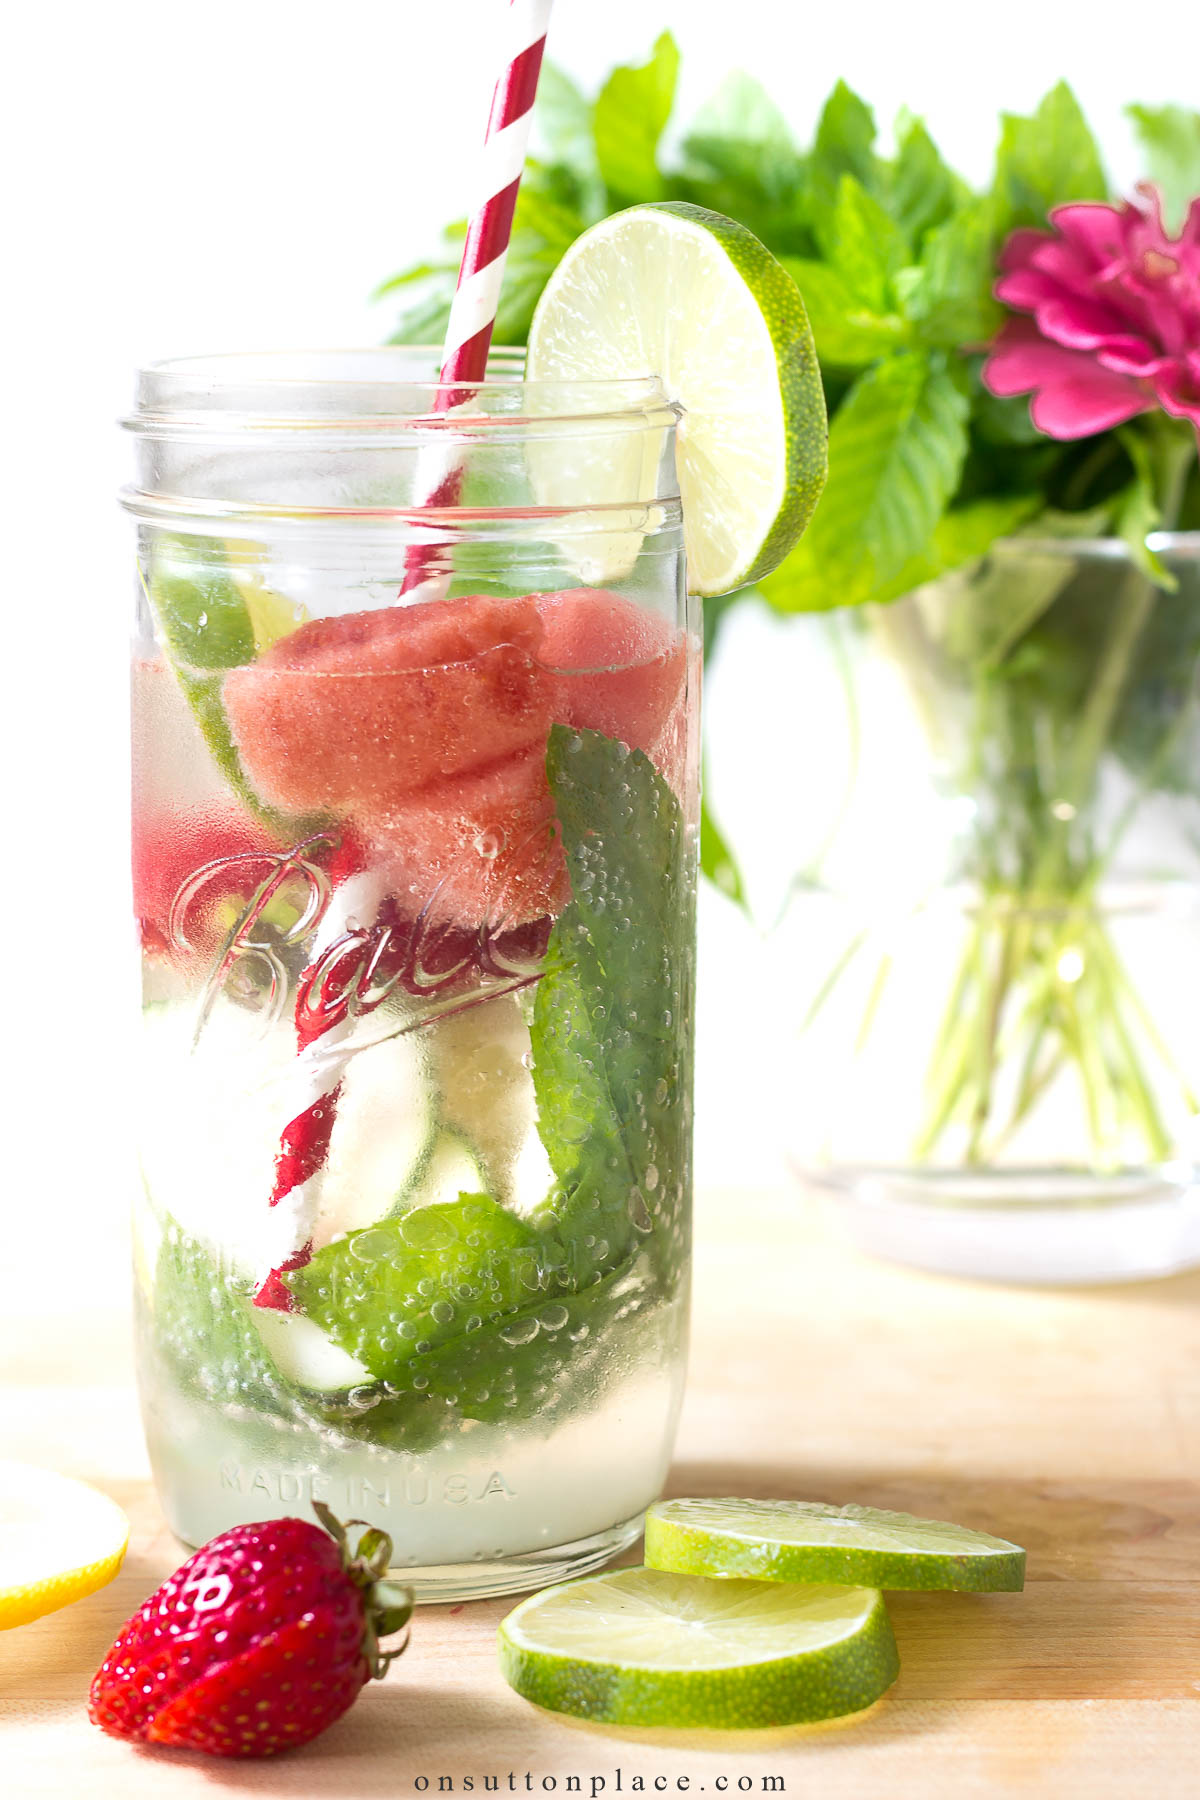 https://www.onsuttonplace.com/wp-content/uploads/2017/07/jar-of-fruit-infused-water-with-straw.jpg